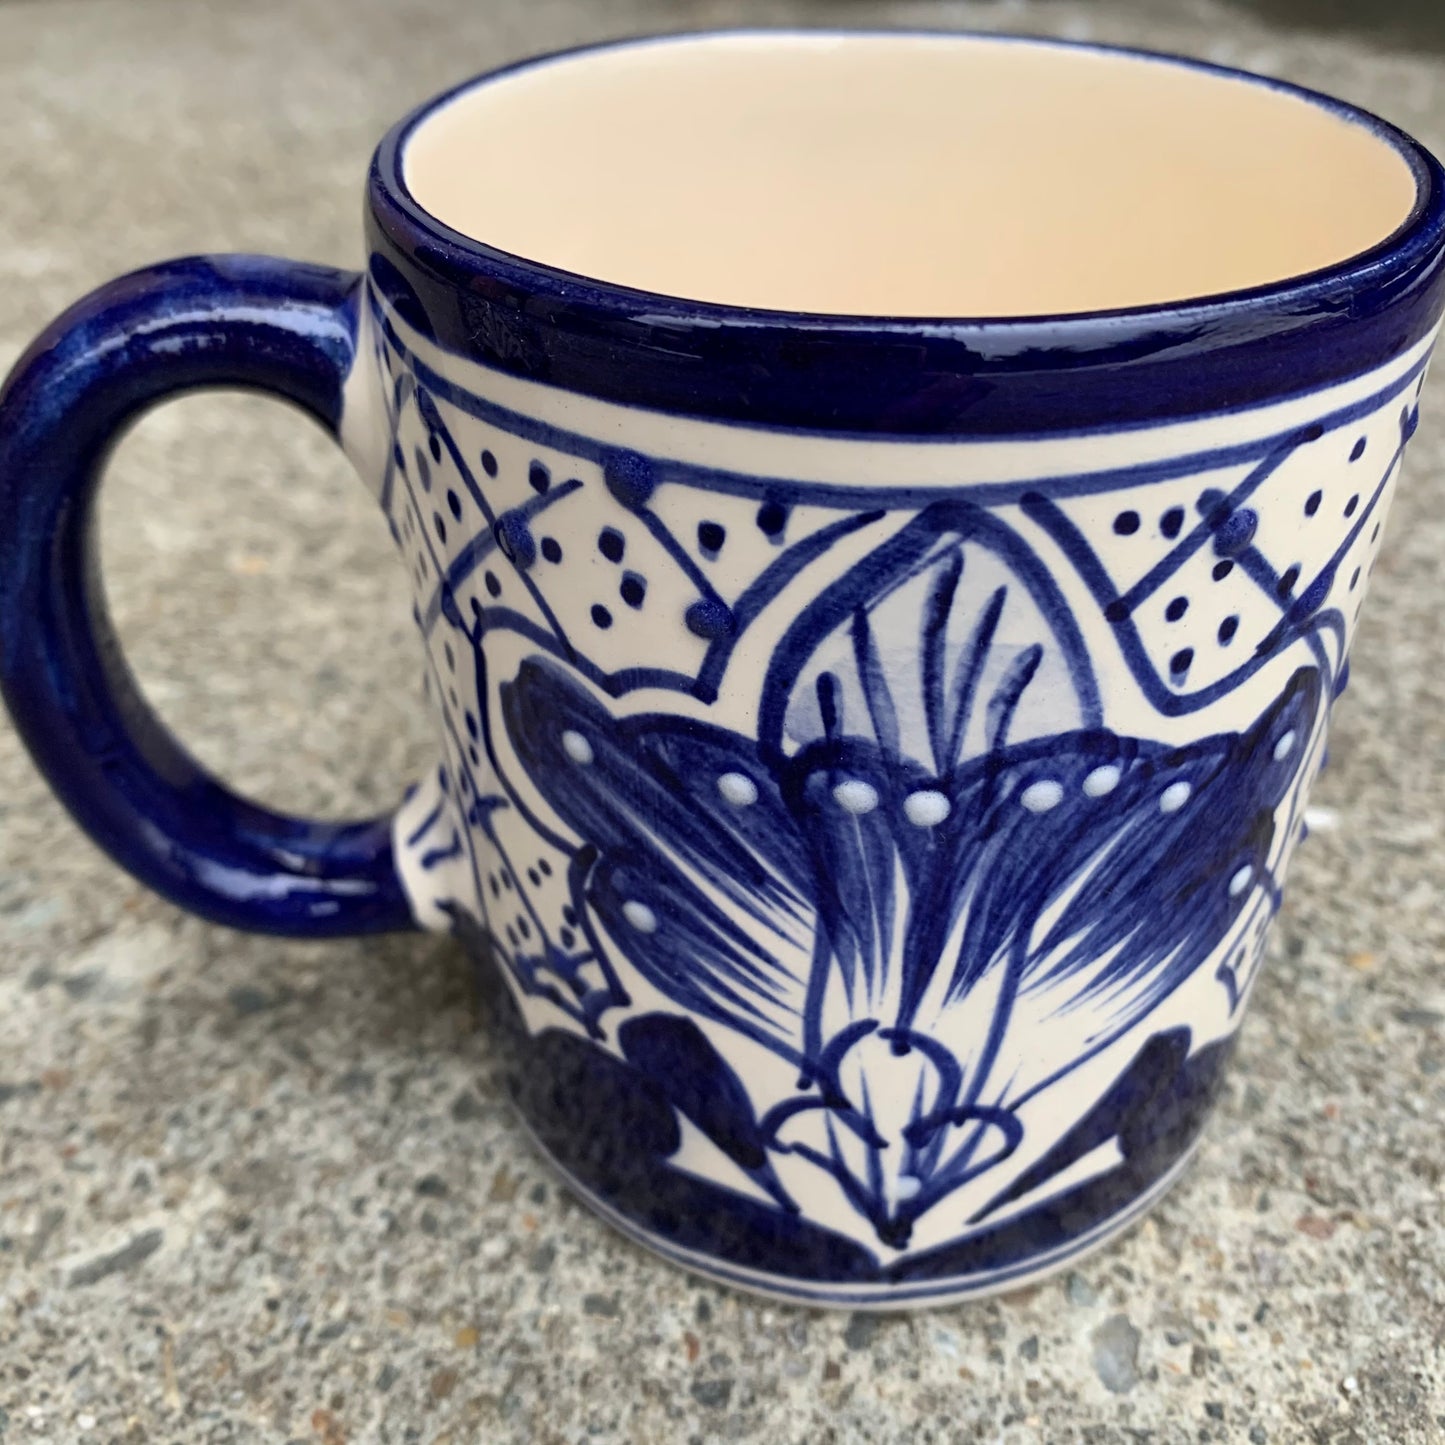 Classic Blue and White Cup Mug